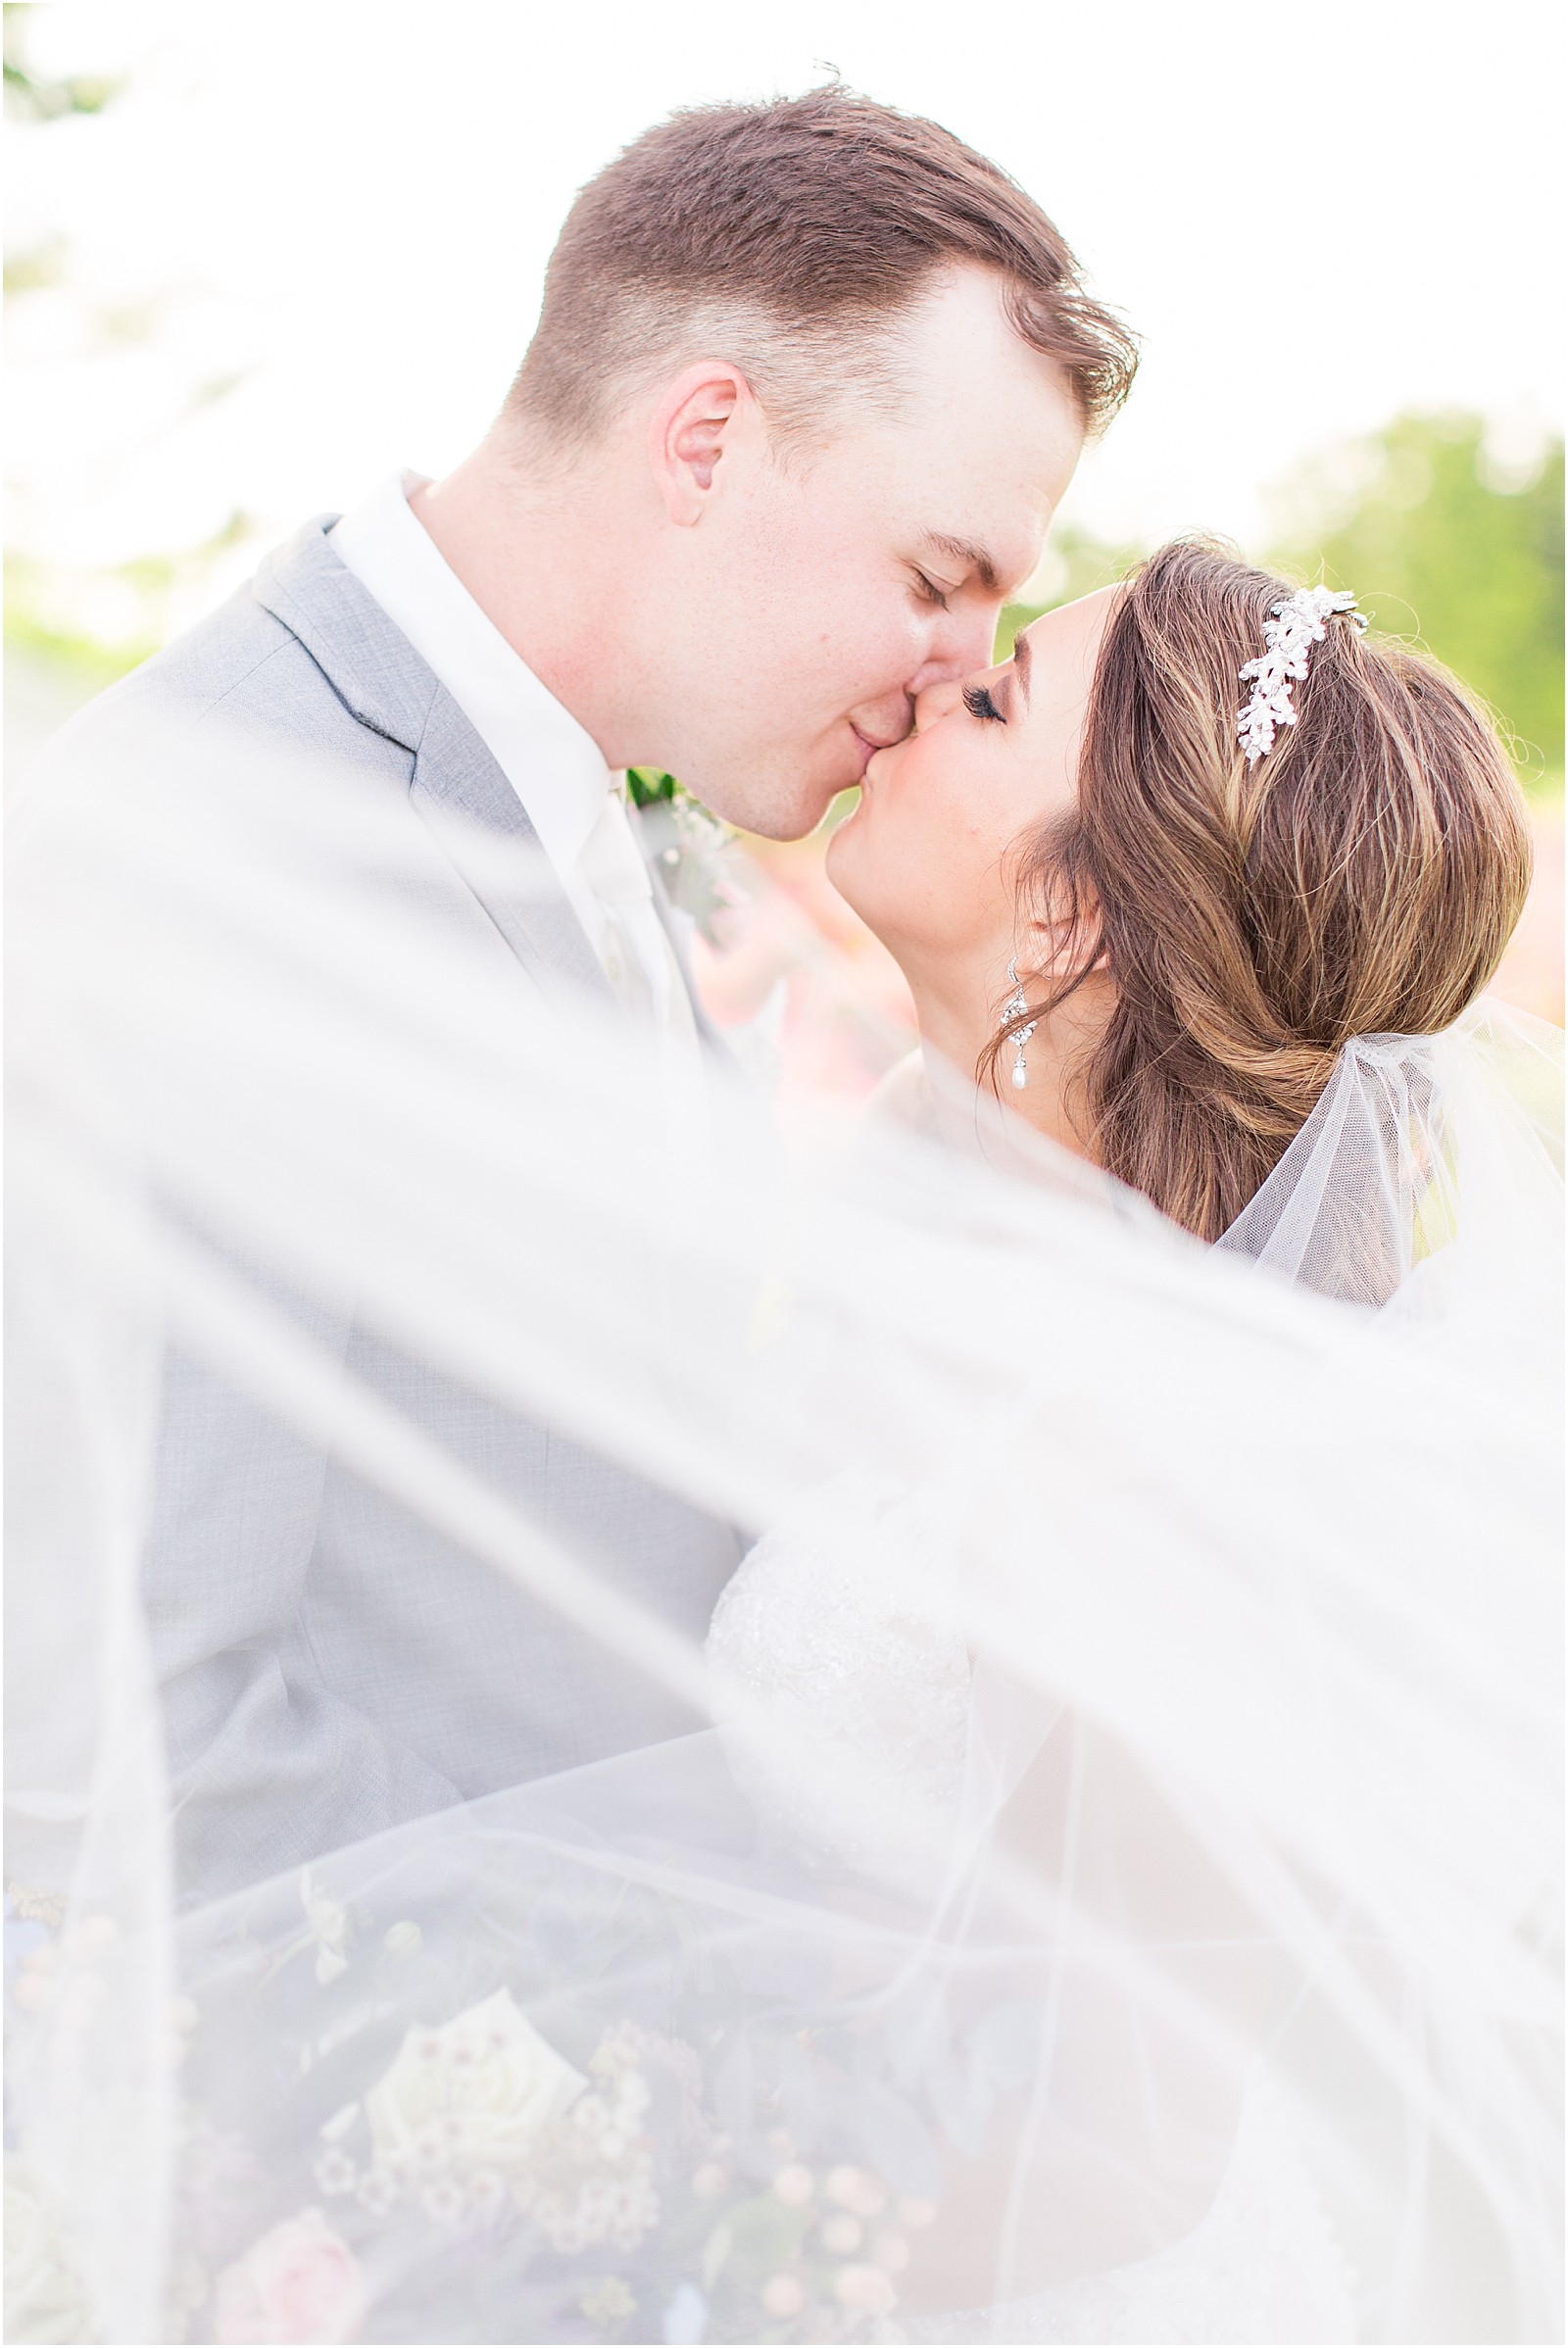 An Evansville County Club Wedding | Abby and Stratton 107.jpg